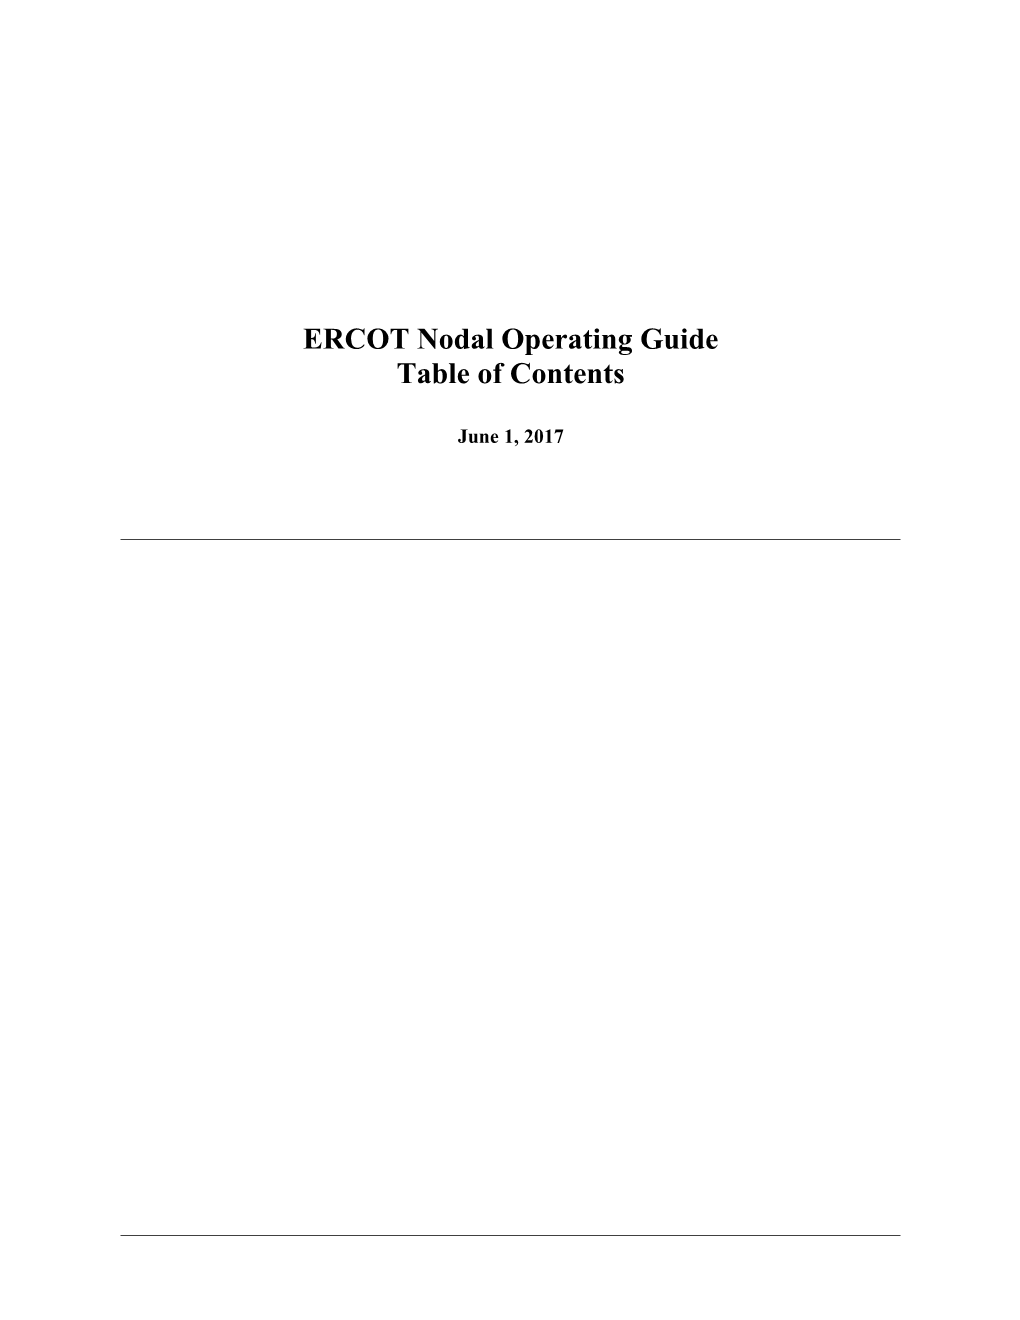 ERCOT Nodal Operating Guide